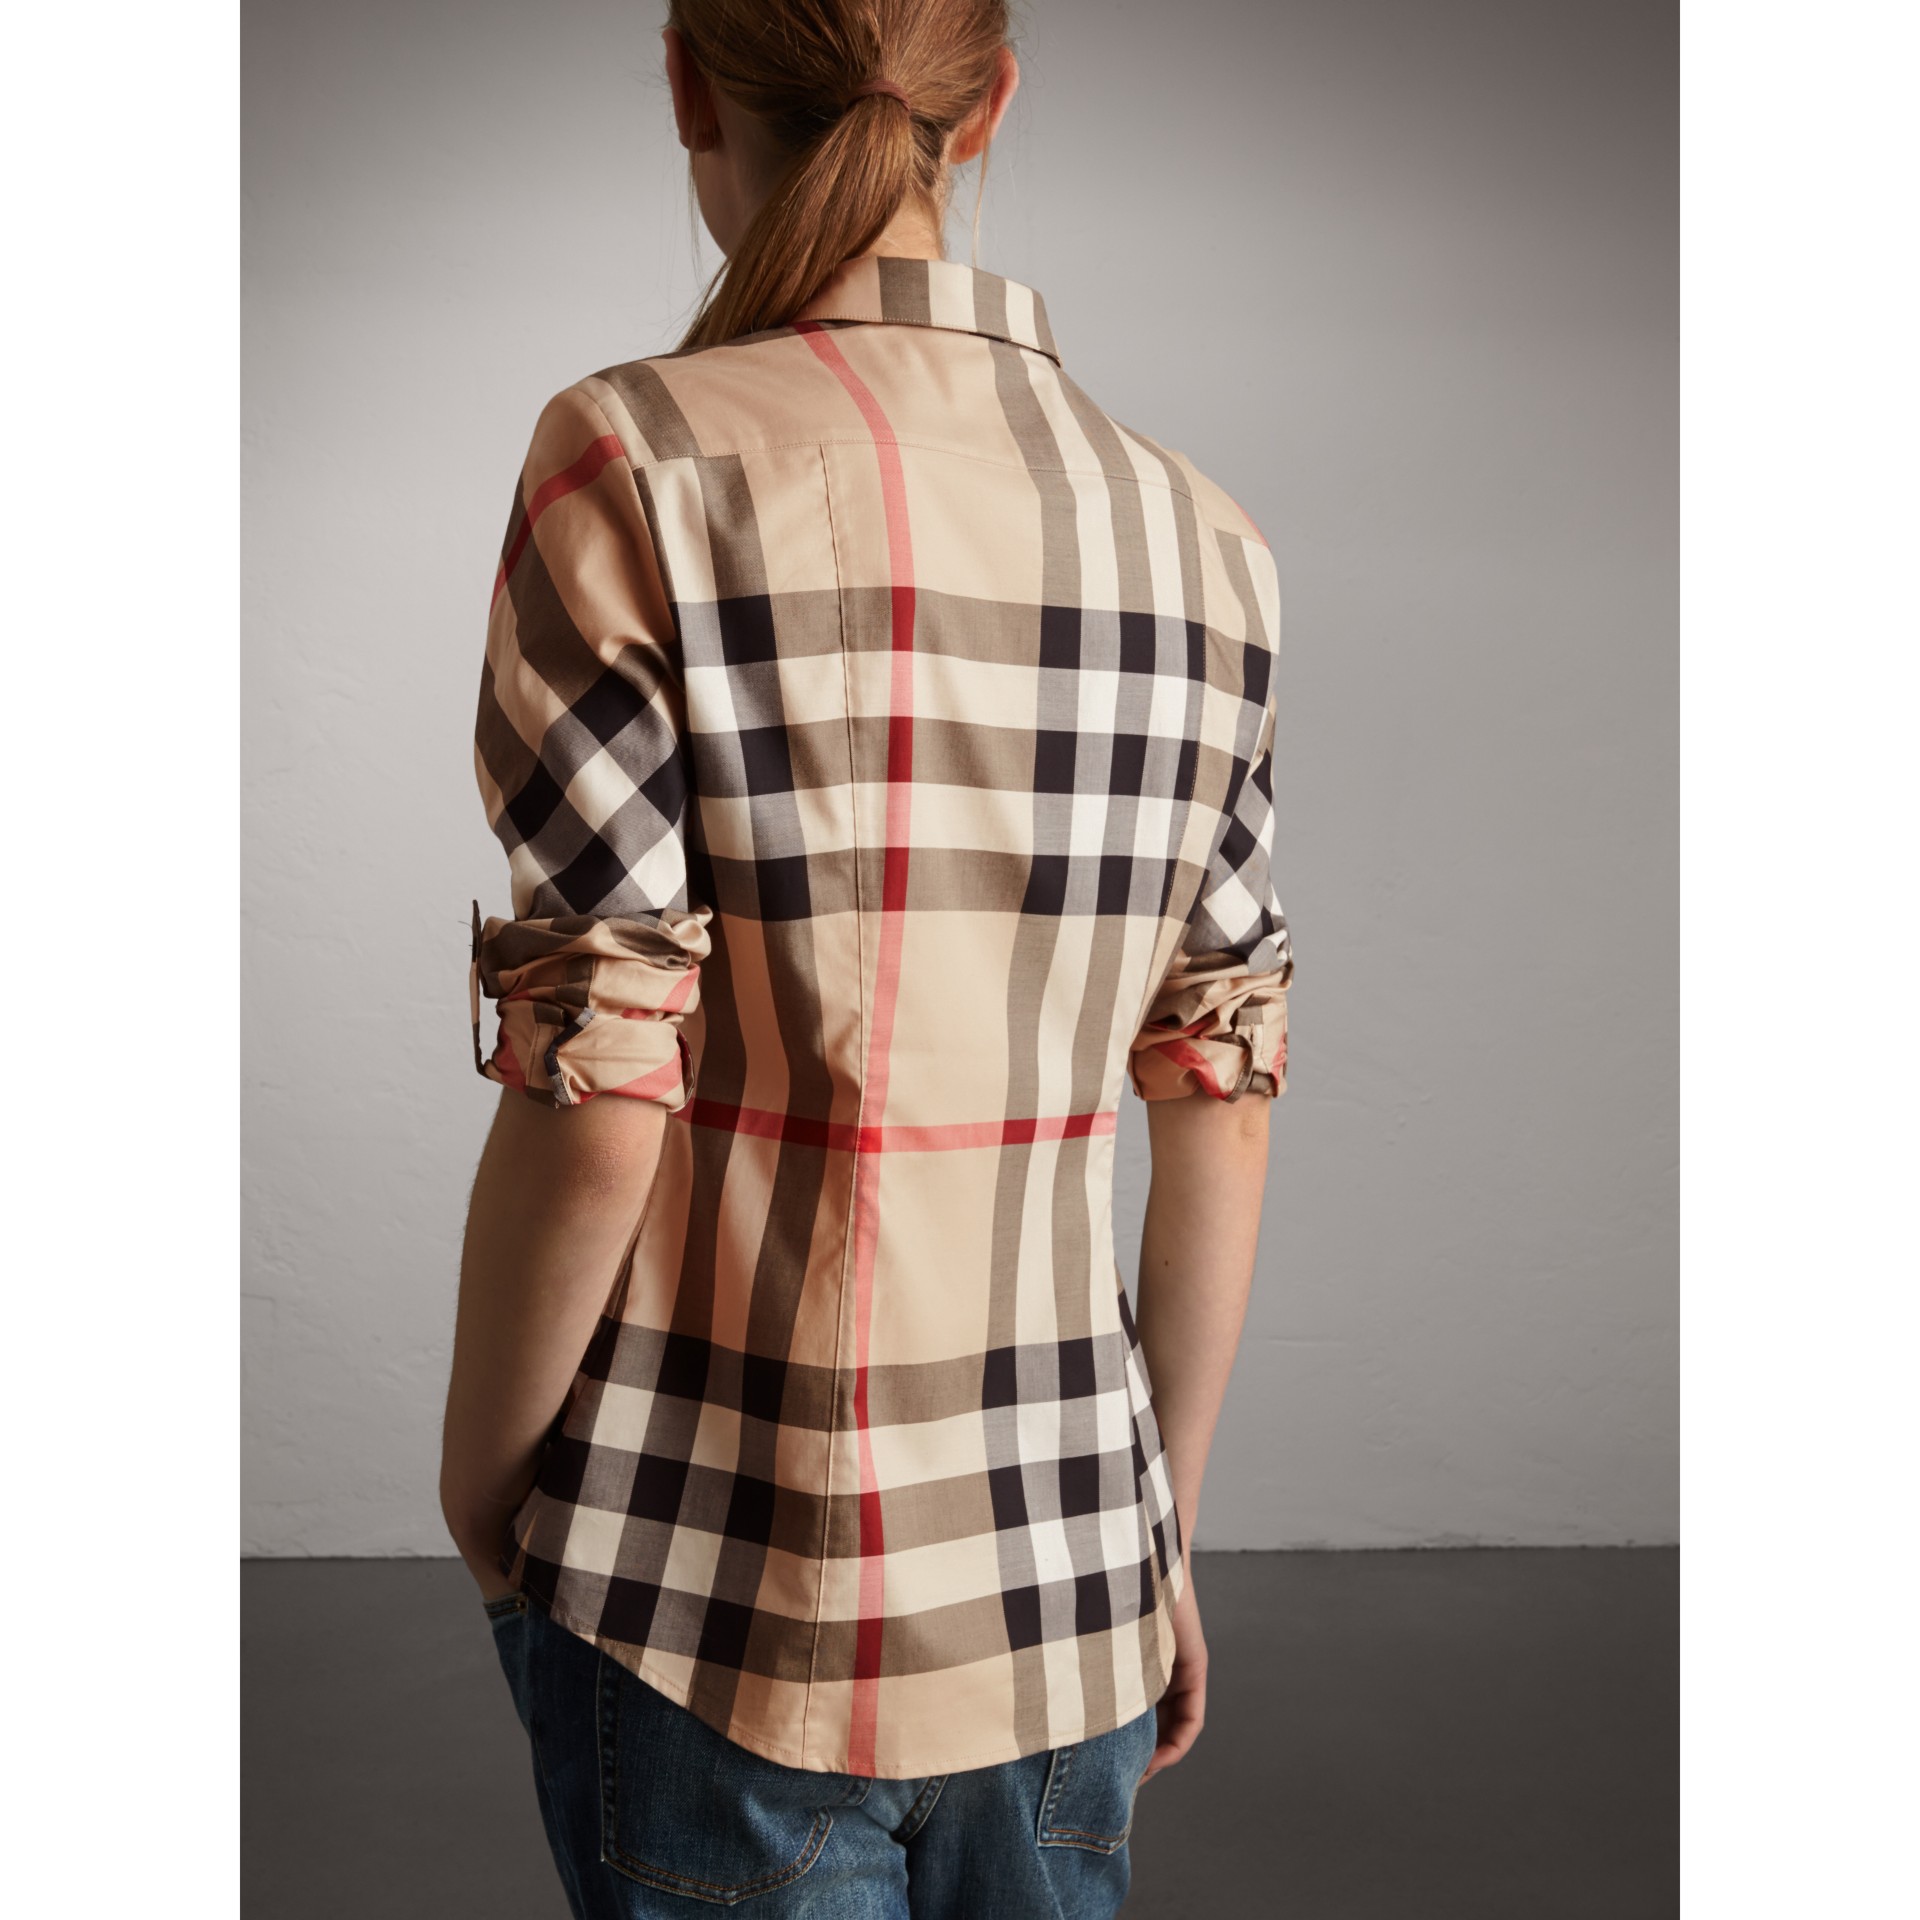 Stretch-Cotton Check Shirt in New Classic - Women | Burberry United States